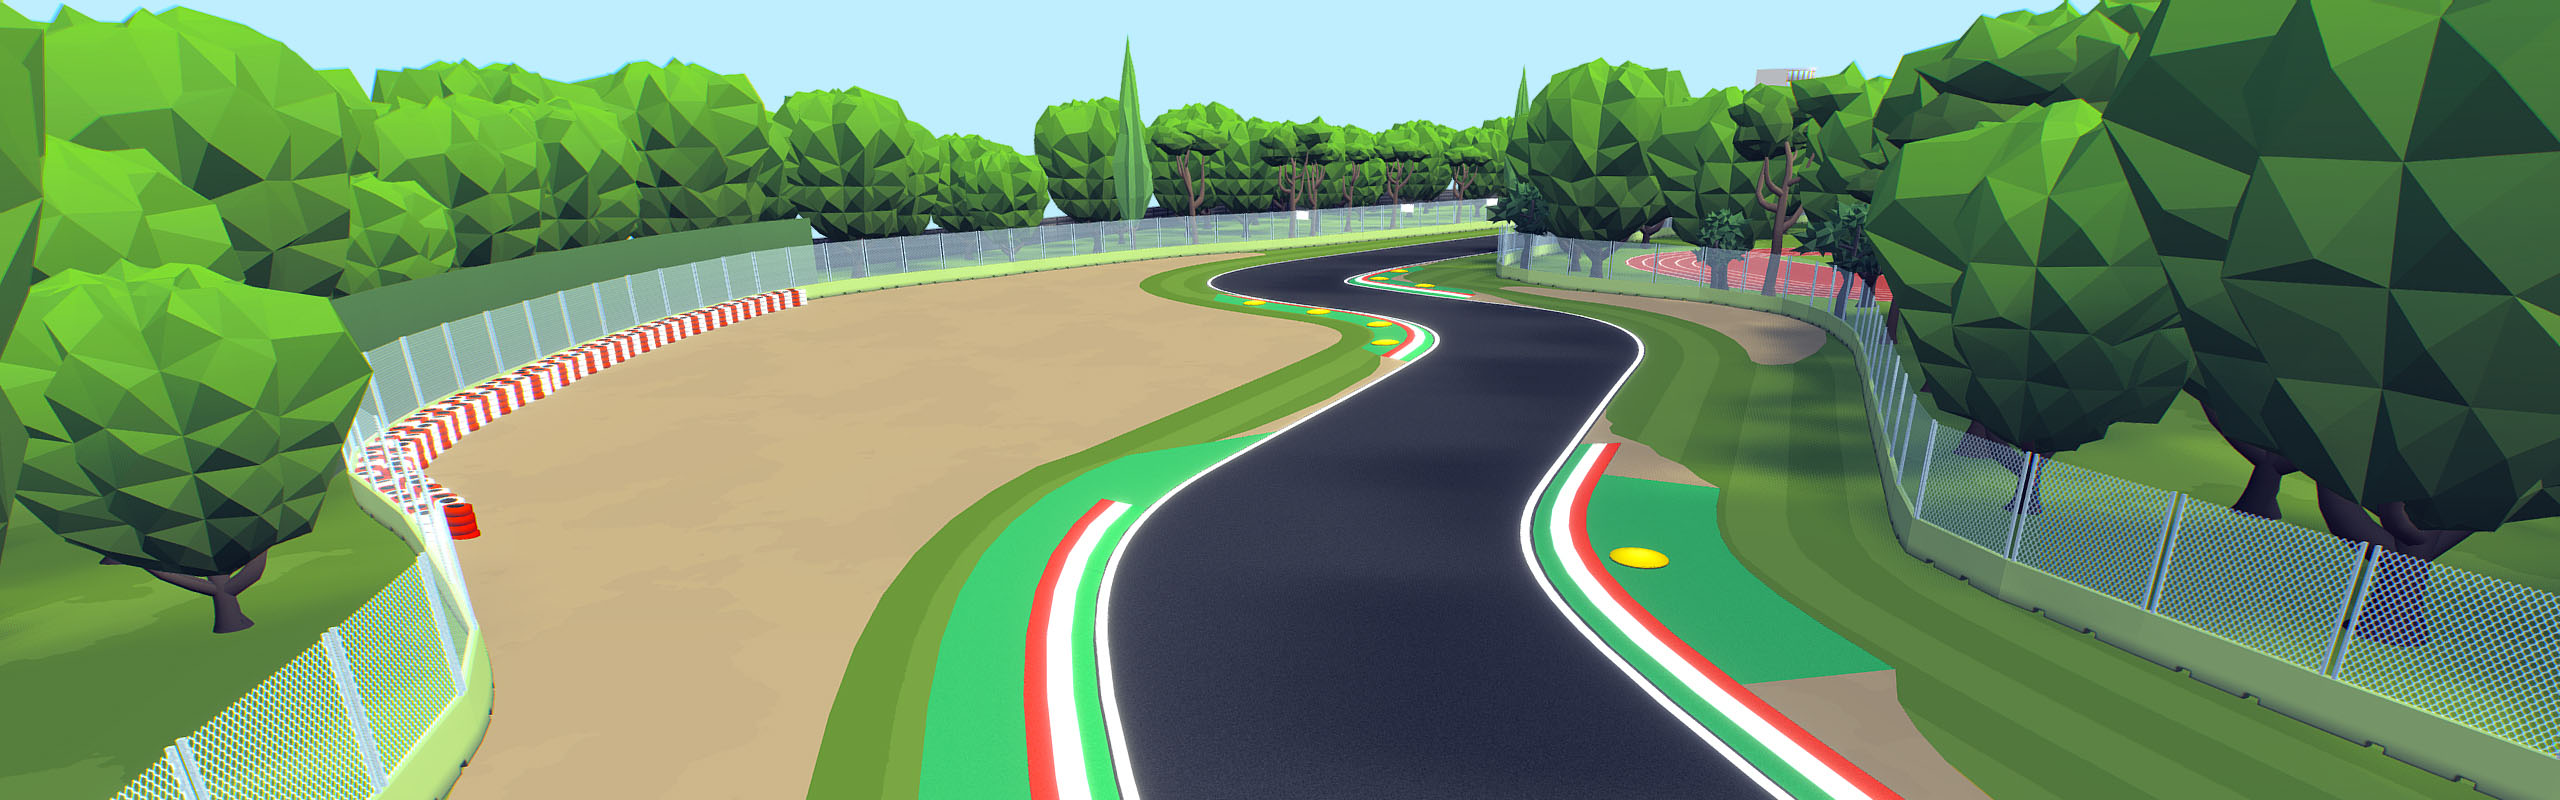 First turn of Imola track